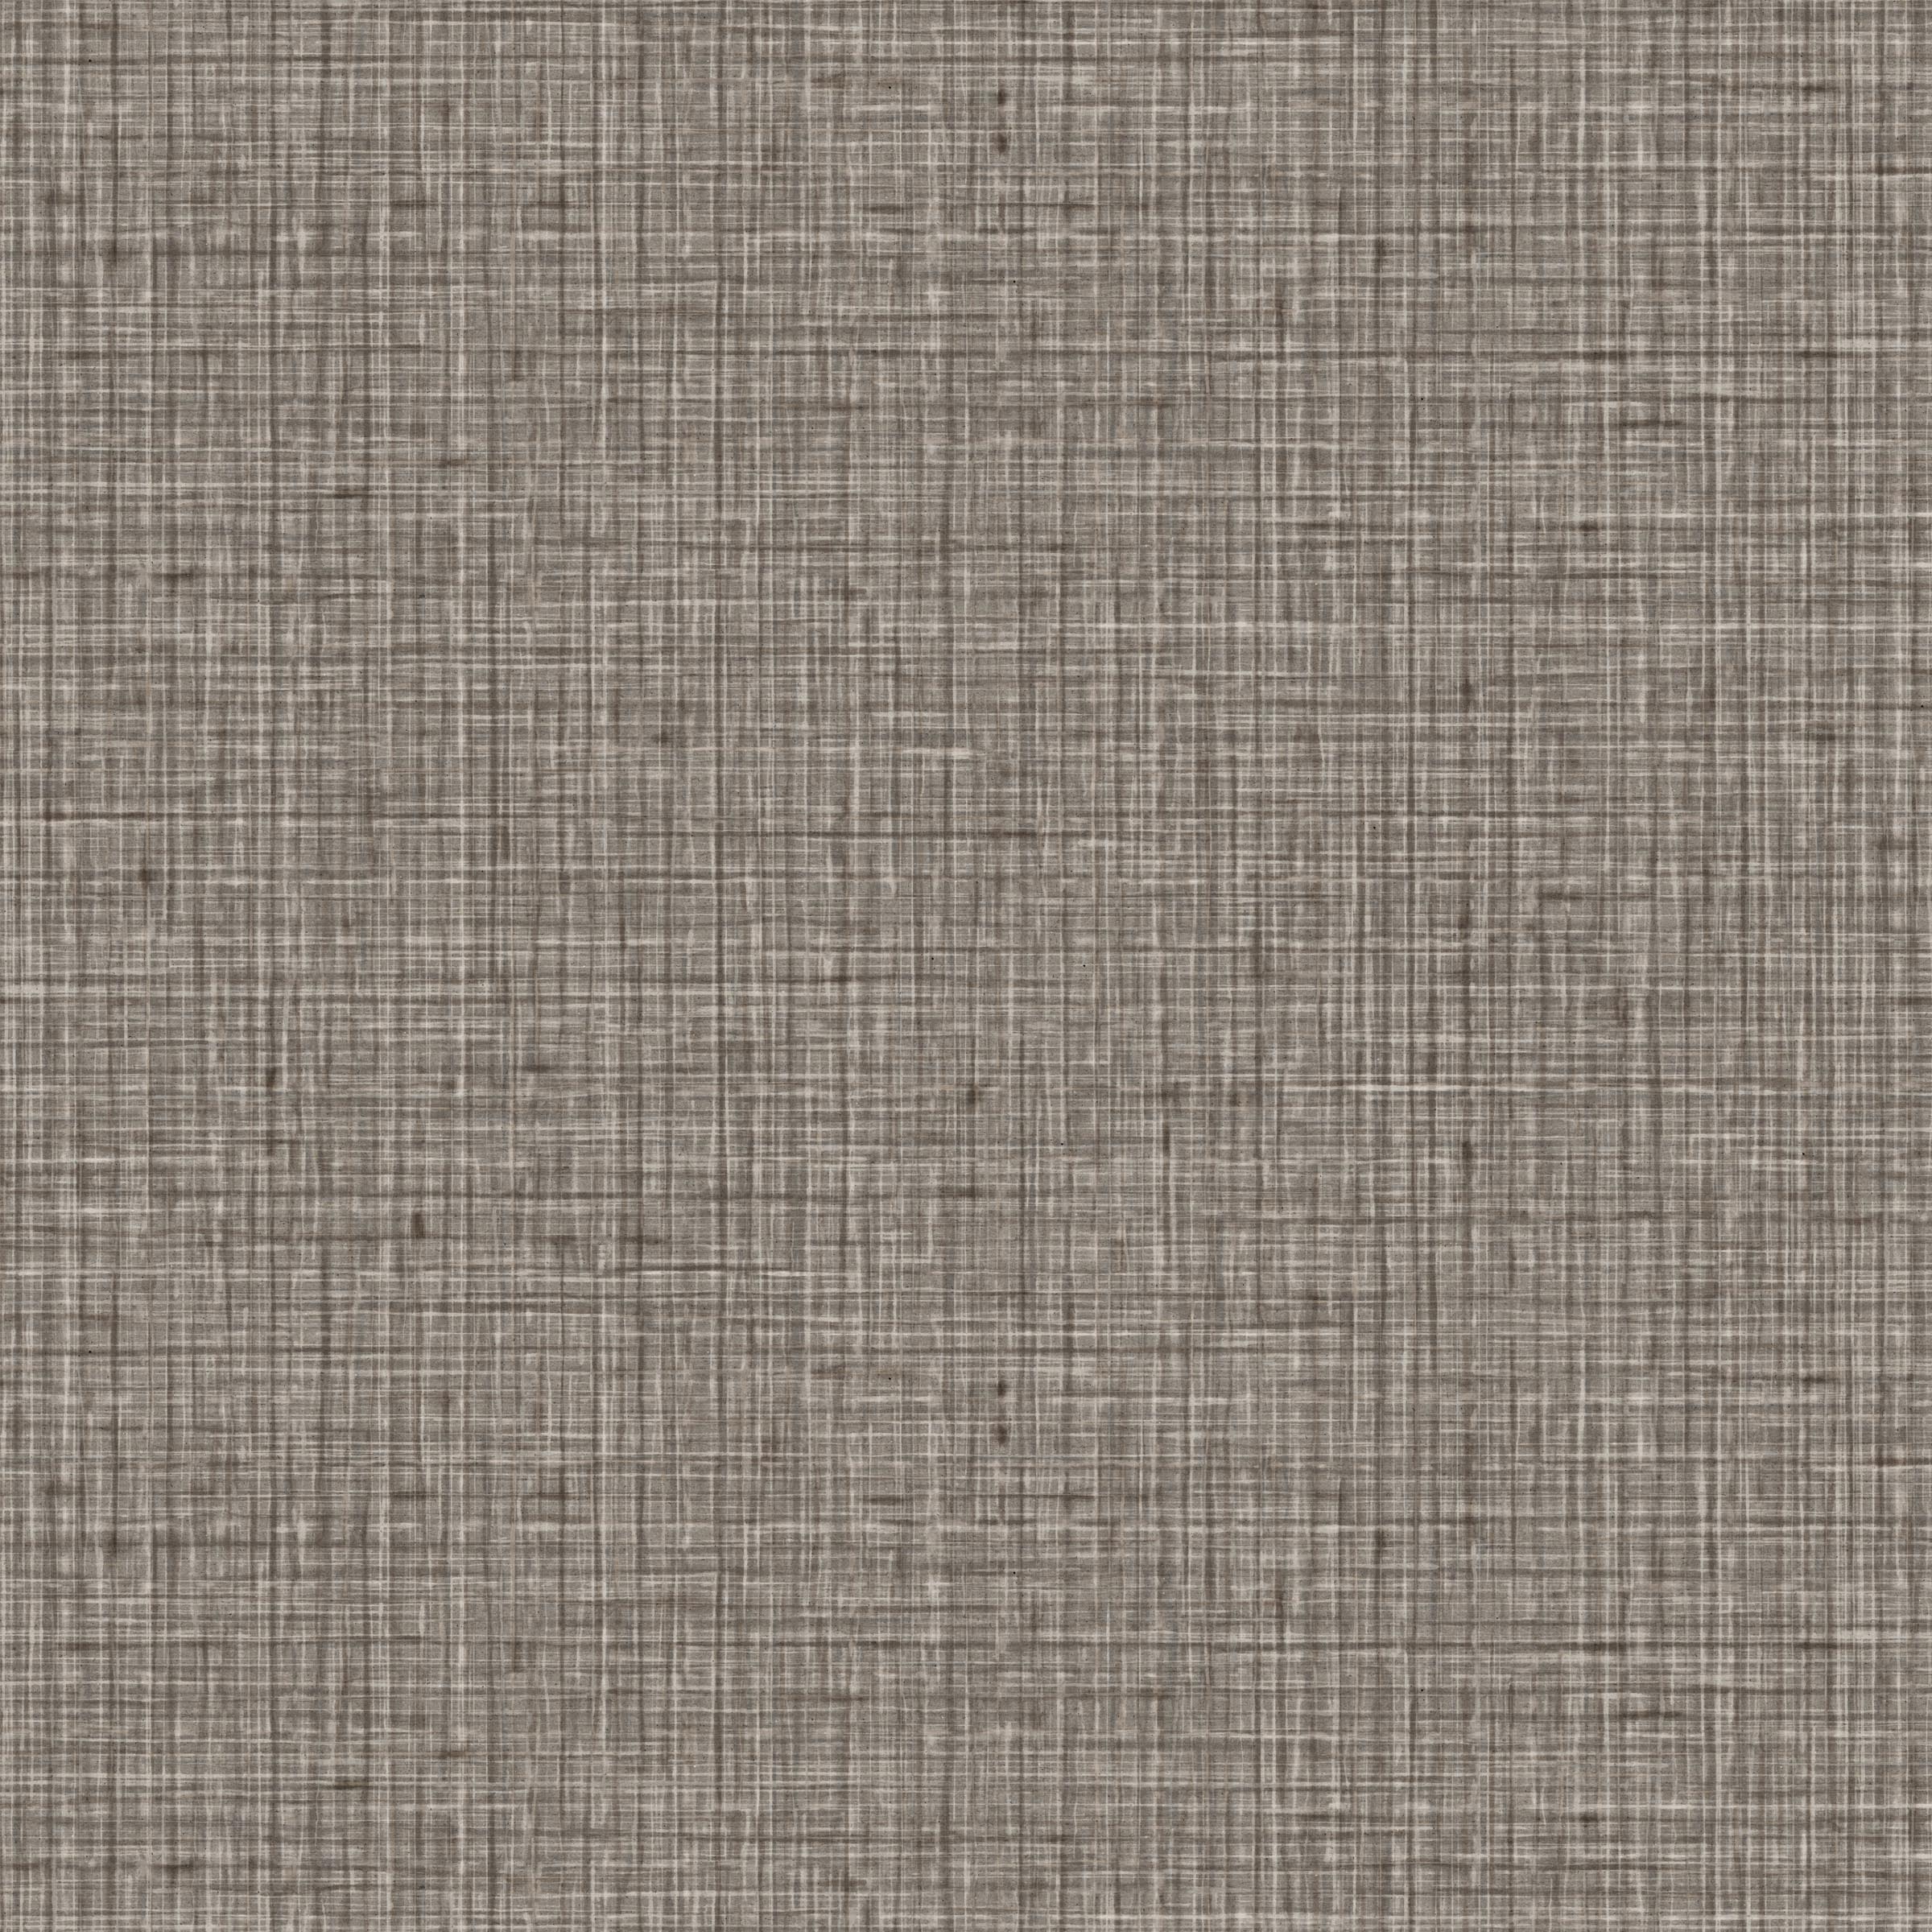 Detail of wallpaper in a textured tweed pattern in shades of brown and gray.